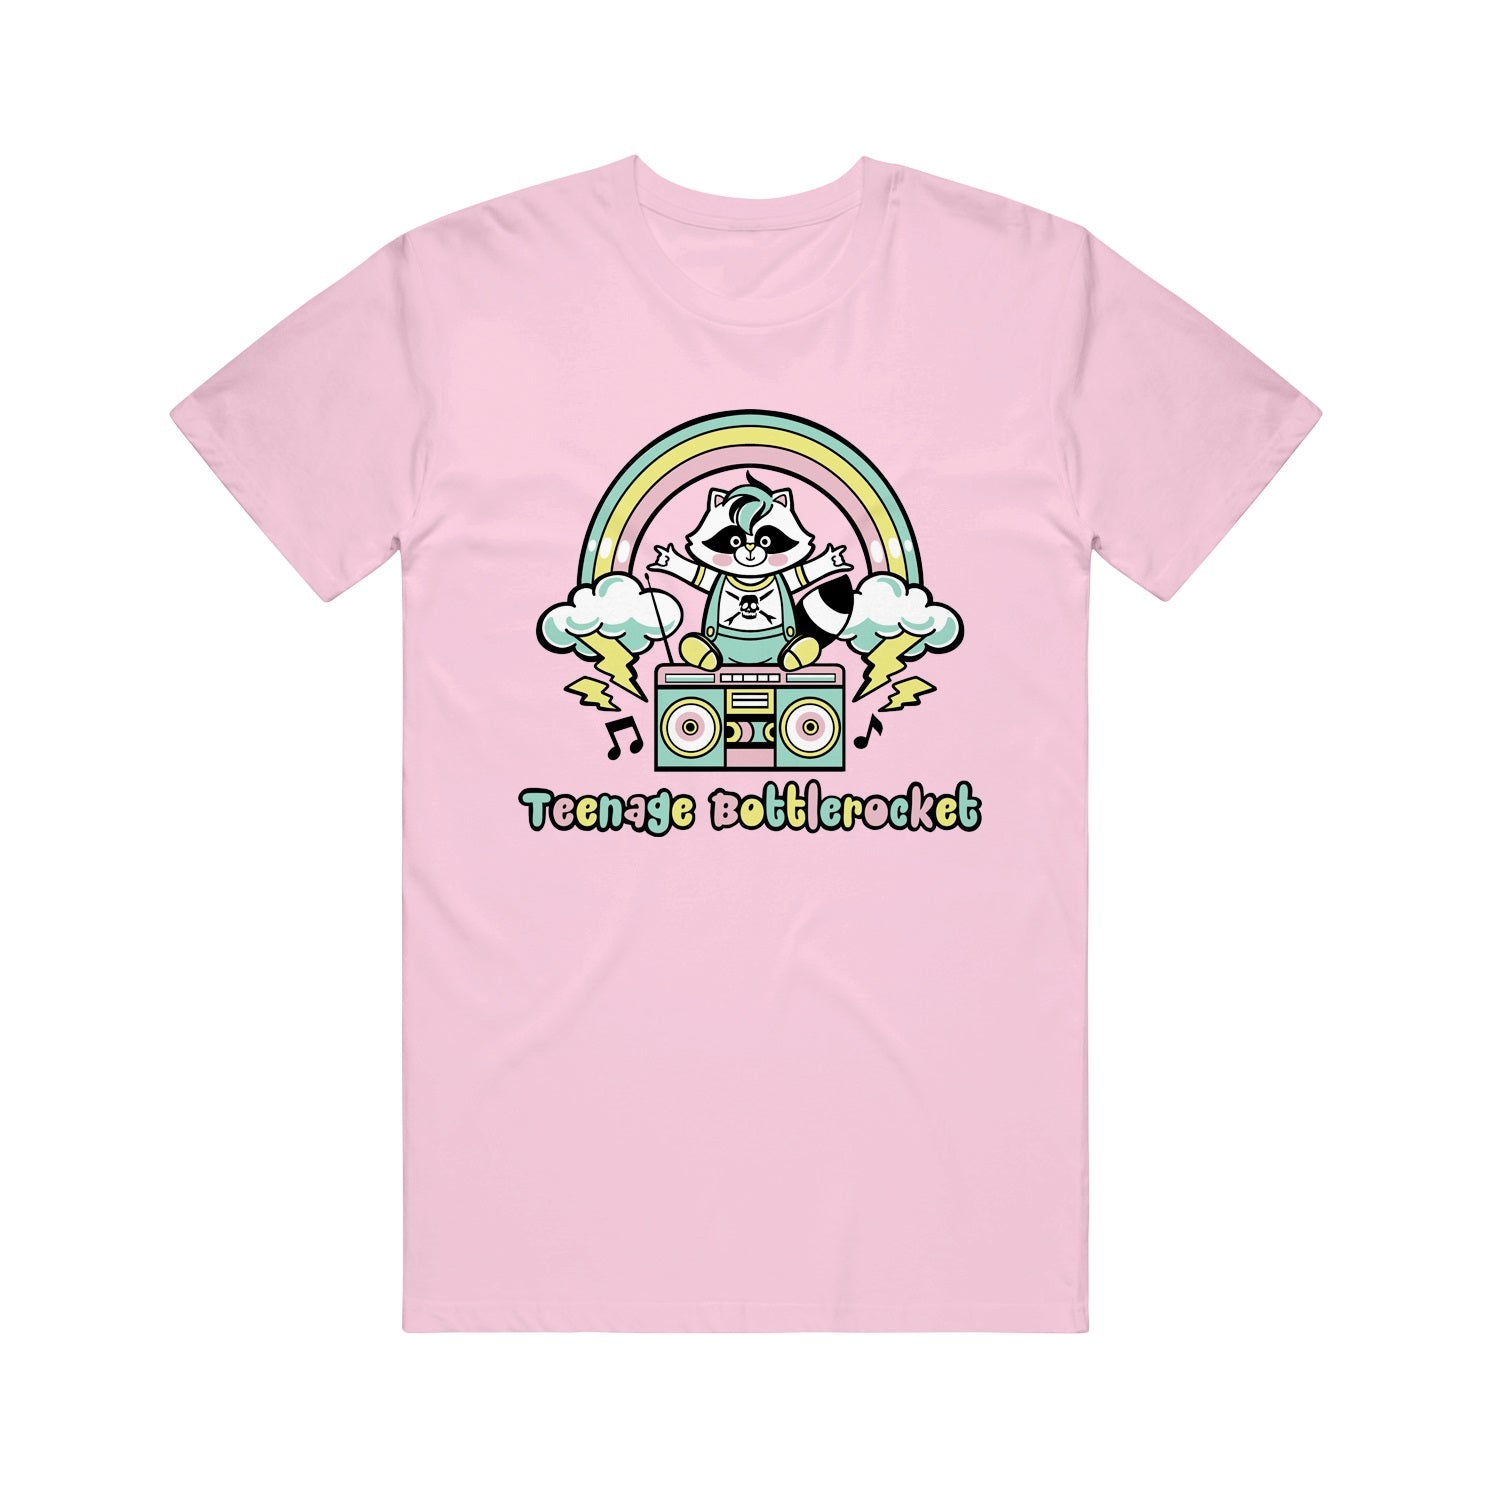 Image of a light pink tshirt against a white background. The center of the shirt has a colorful graphic of a raccoon sitting on top of a boombox. There is a rainbow with clouds at the end of the rainbow, shooting lightning bolts out. This is above the raccoon's head. Below the boombox in blue, pink, and yellow alternating colors are the words teenage bottlerocket. There are black music notes coming out of the sides of the boombox.